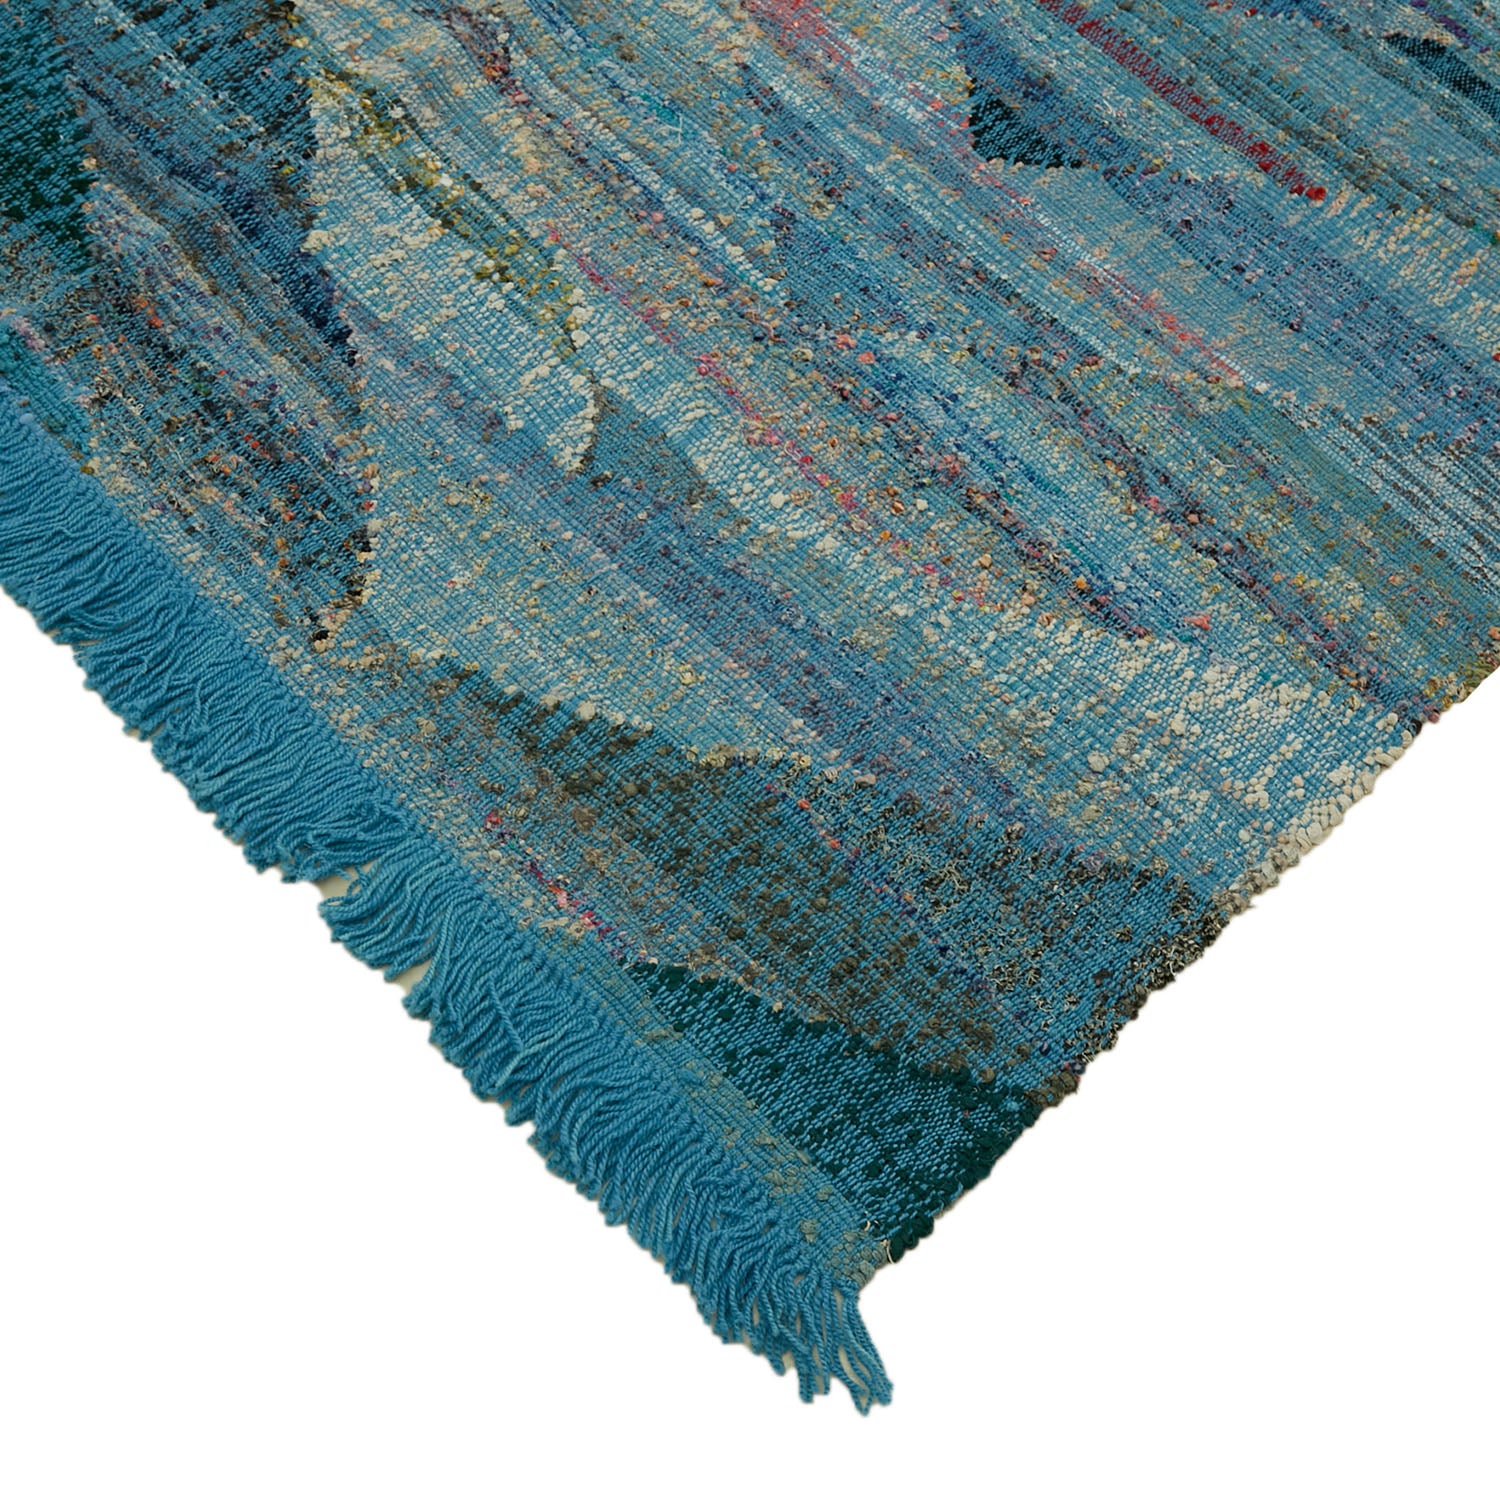 Vibrantly textured textile with shades of blue and distressed appearance.